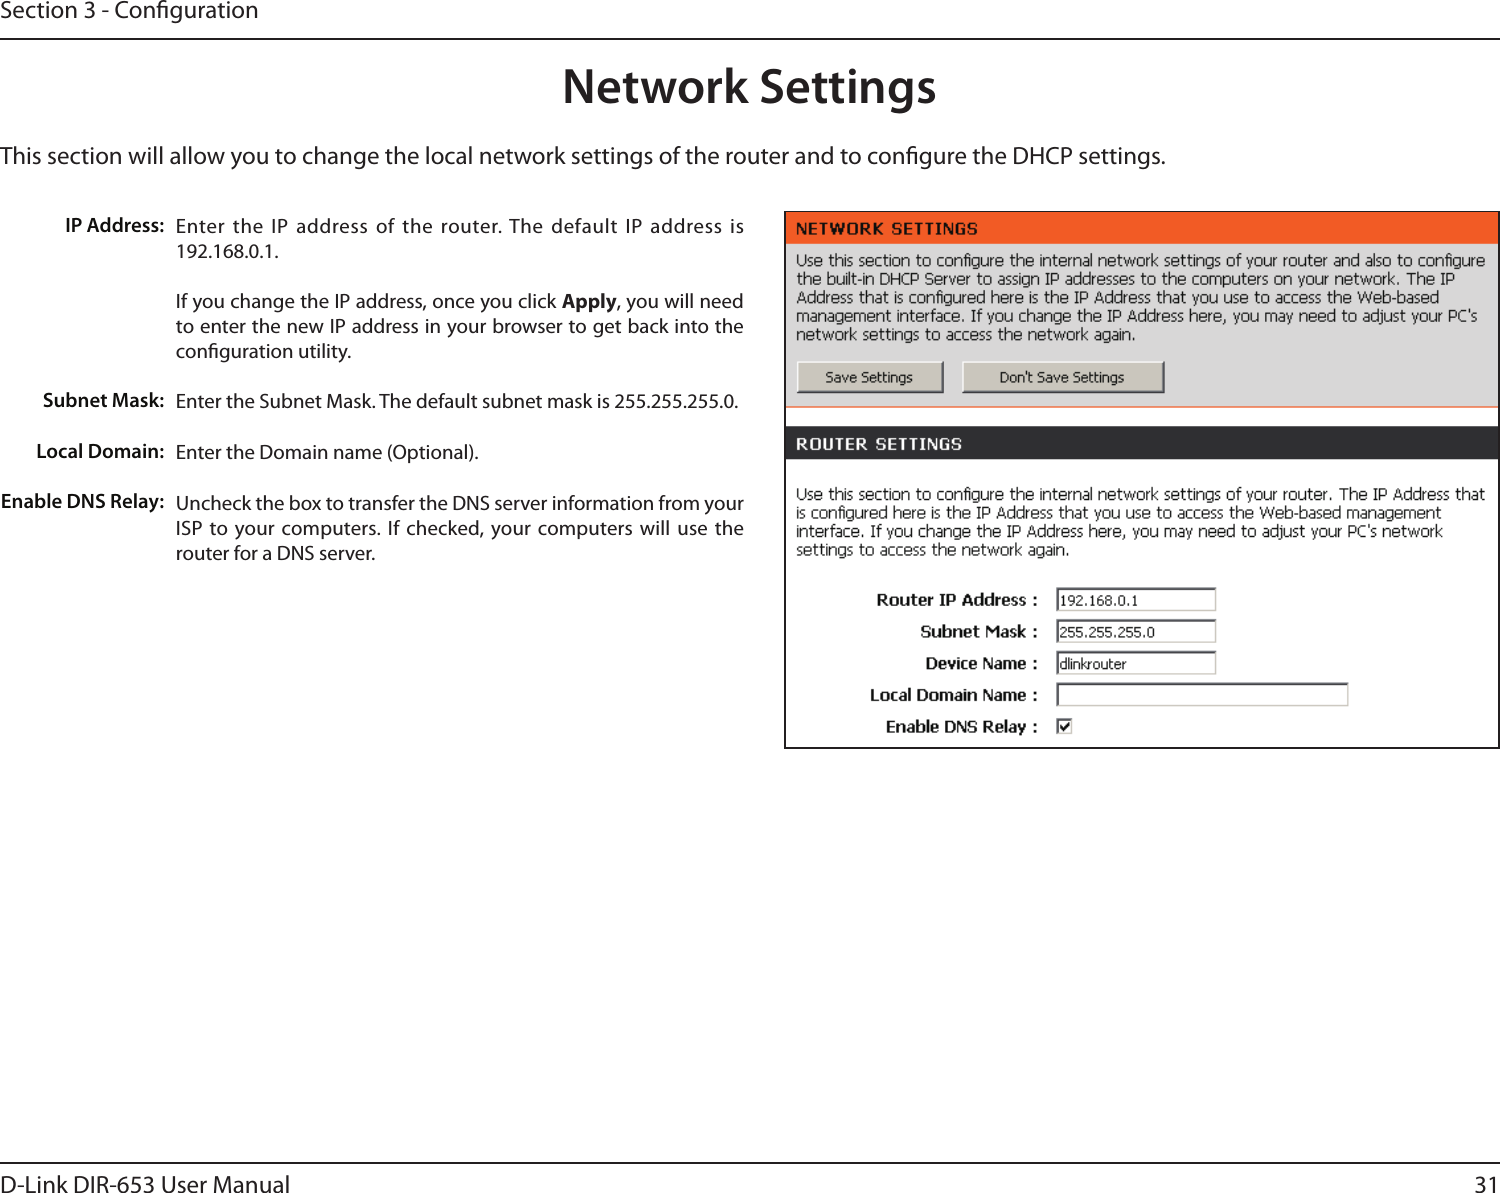 31D-Link DIR-653 User ManualSection 3 - CongurationThis section will allow you to change the local network settings of the router and to congure the DHCP settings.Network SettingsEnter the IP address of the  router. The default IP address is 192.168.0.1.If you change the IP address, once you click Apply, you will need to enter the new IP address in your browser to get back into the conguration utility.Enter the Subnet Mask. The default subnet mask is 255.255.255.0.Enter the Domain name (Optional).Uncheck the box to transfer the DNS server information from your ISP to  your computers. If  checked, your computers will use  the router for a DNS server.IP Address:Subnet Mask:Local Domain:Enable DNS Relay: